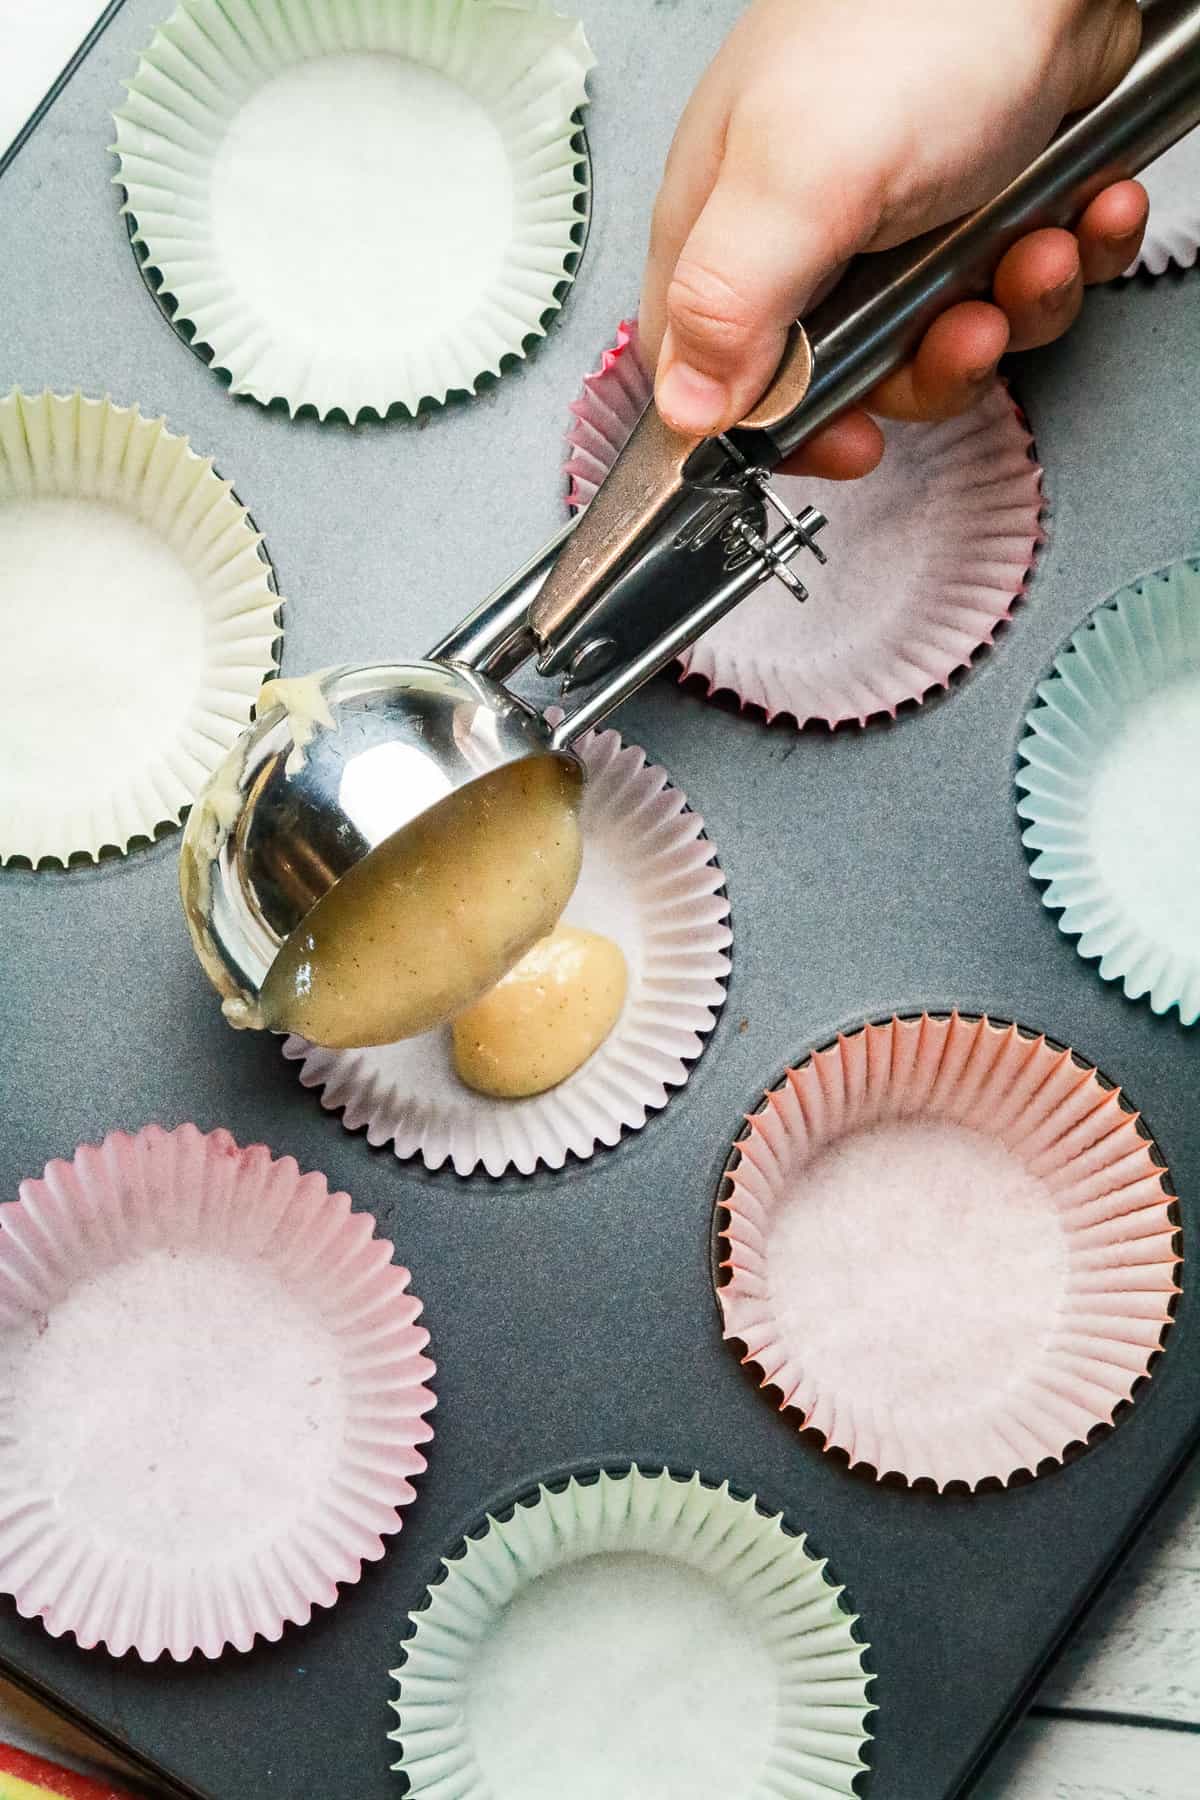 Using a large ice cream scoop filled ¾ of the way full, pour into the cupcake liner.